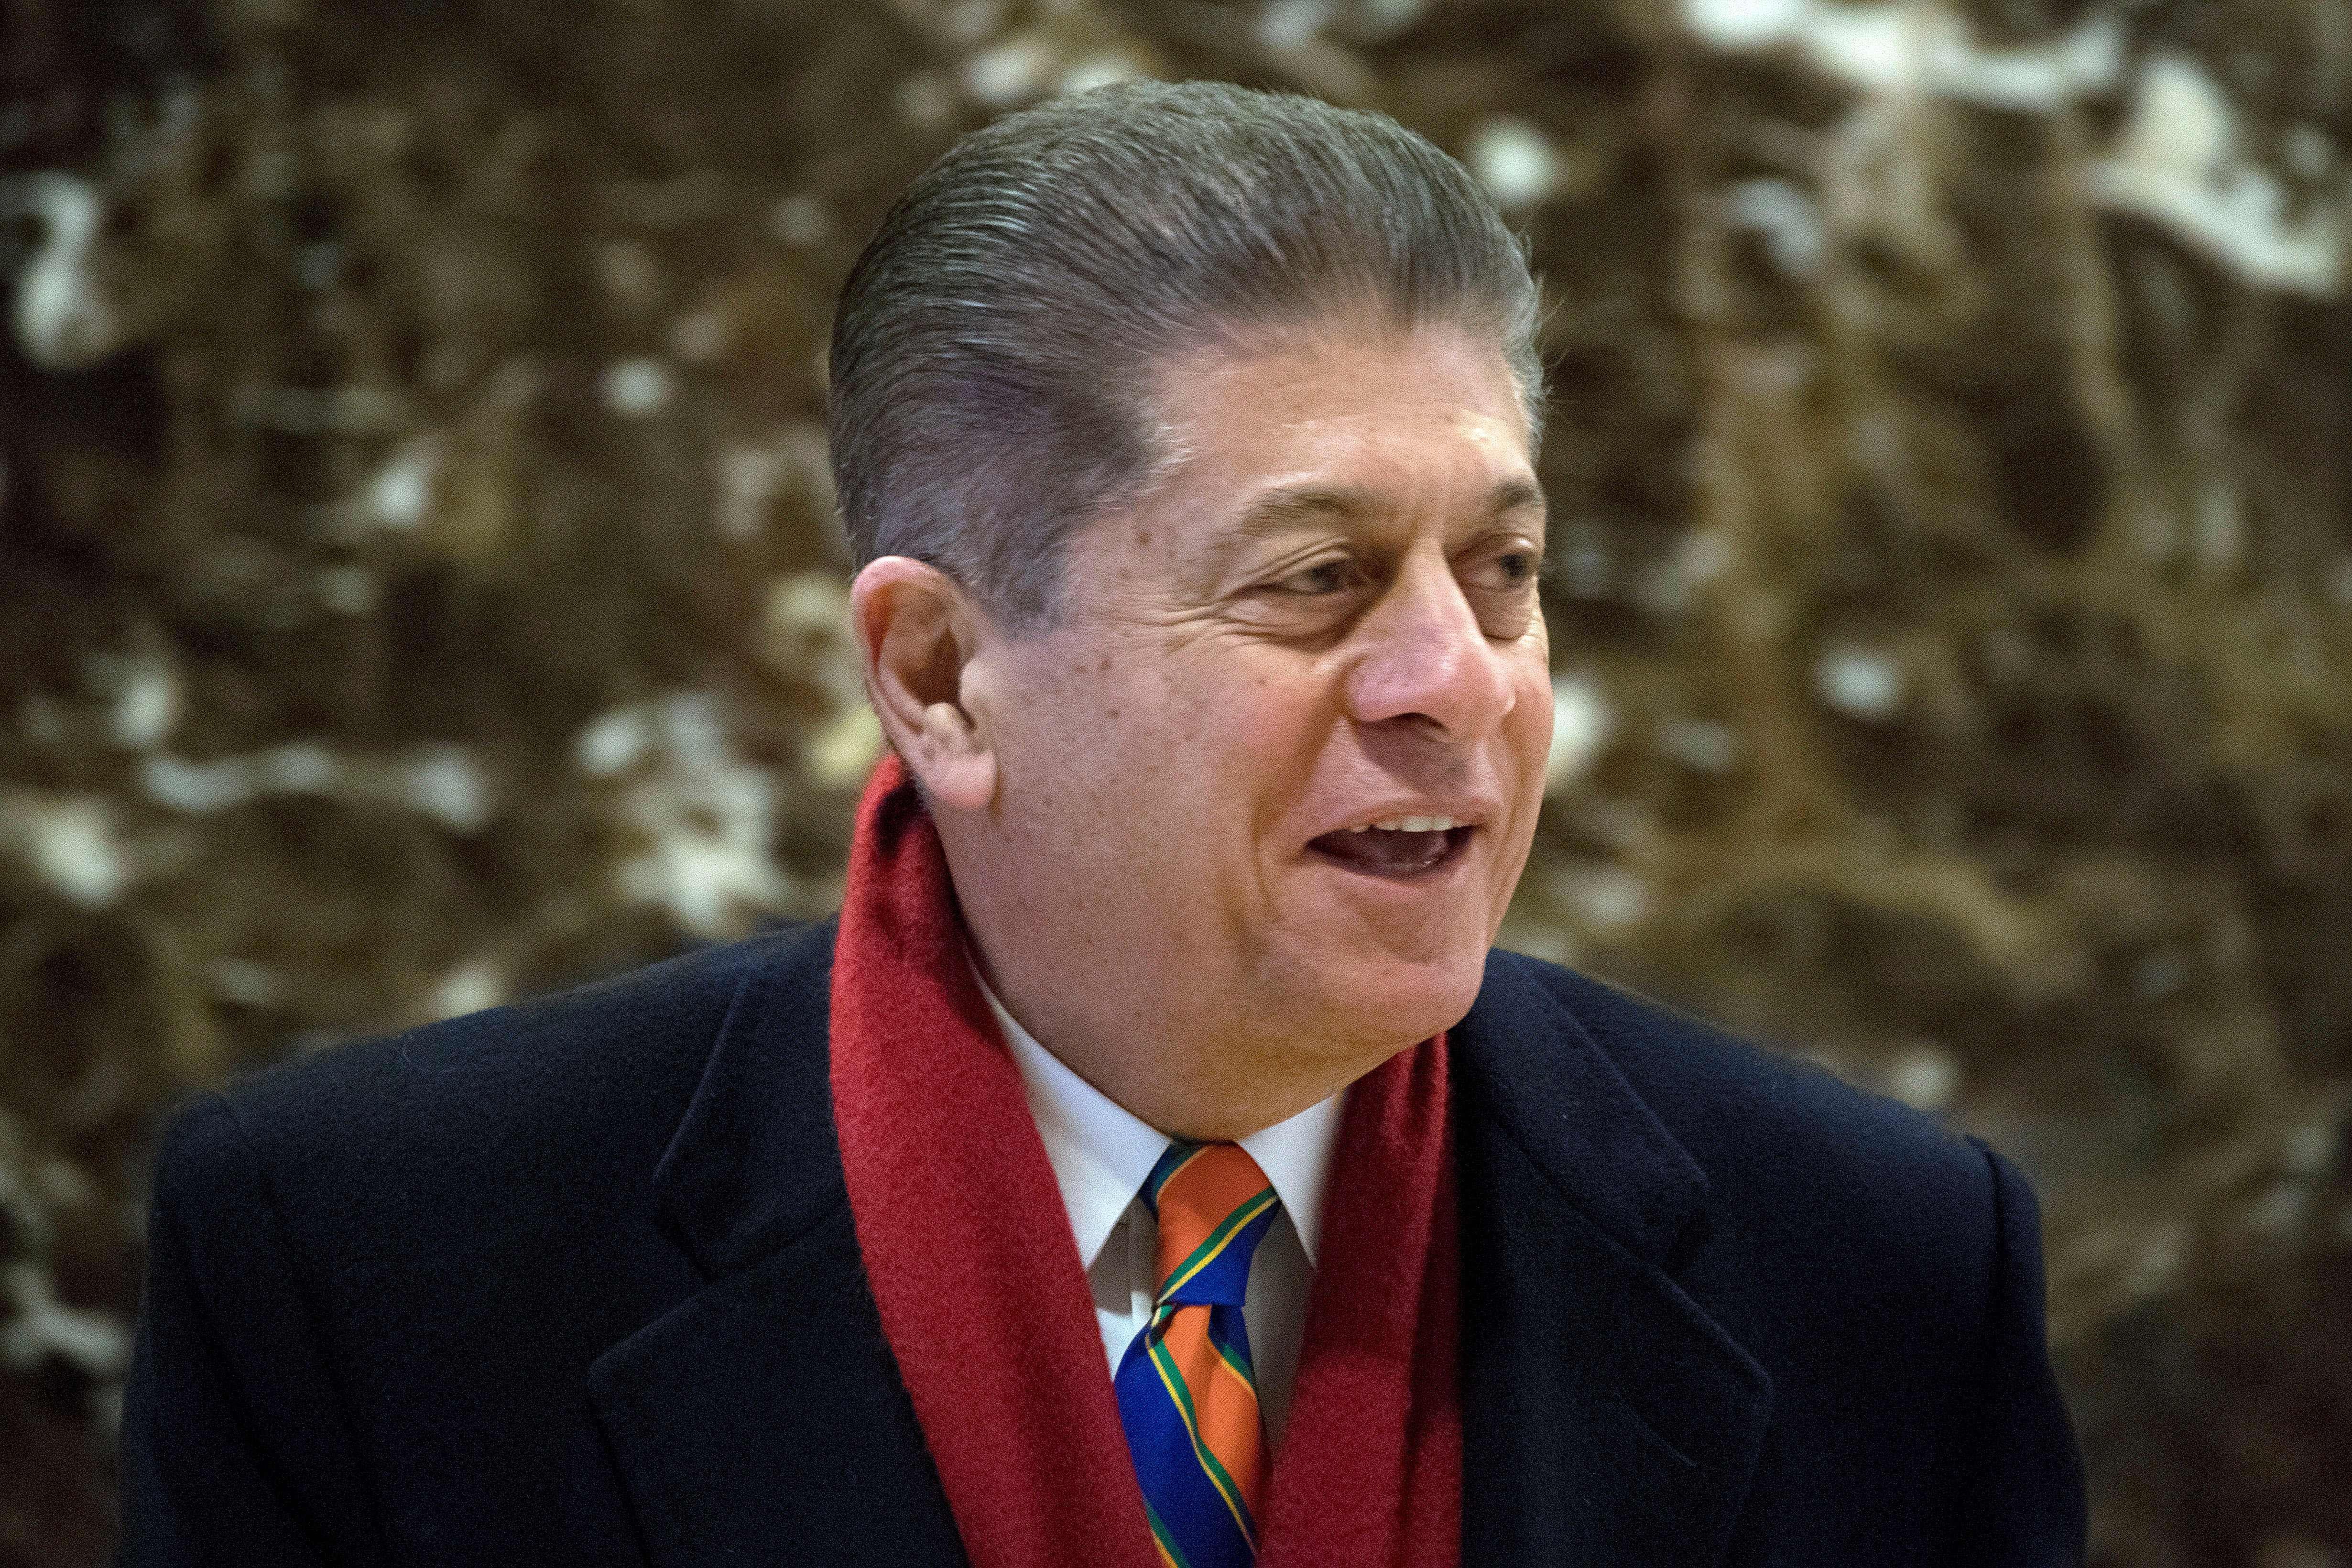 Judge Andrew Napolitano, the senior judicial analyst for Fox News, arrives at Trump Tower in New York on December 15, 2016.